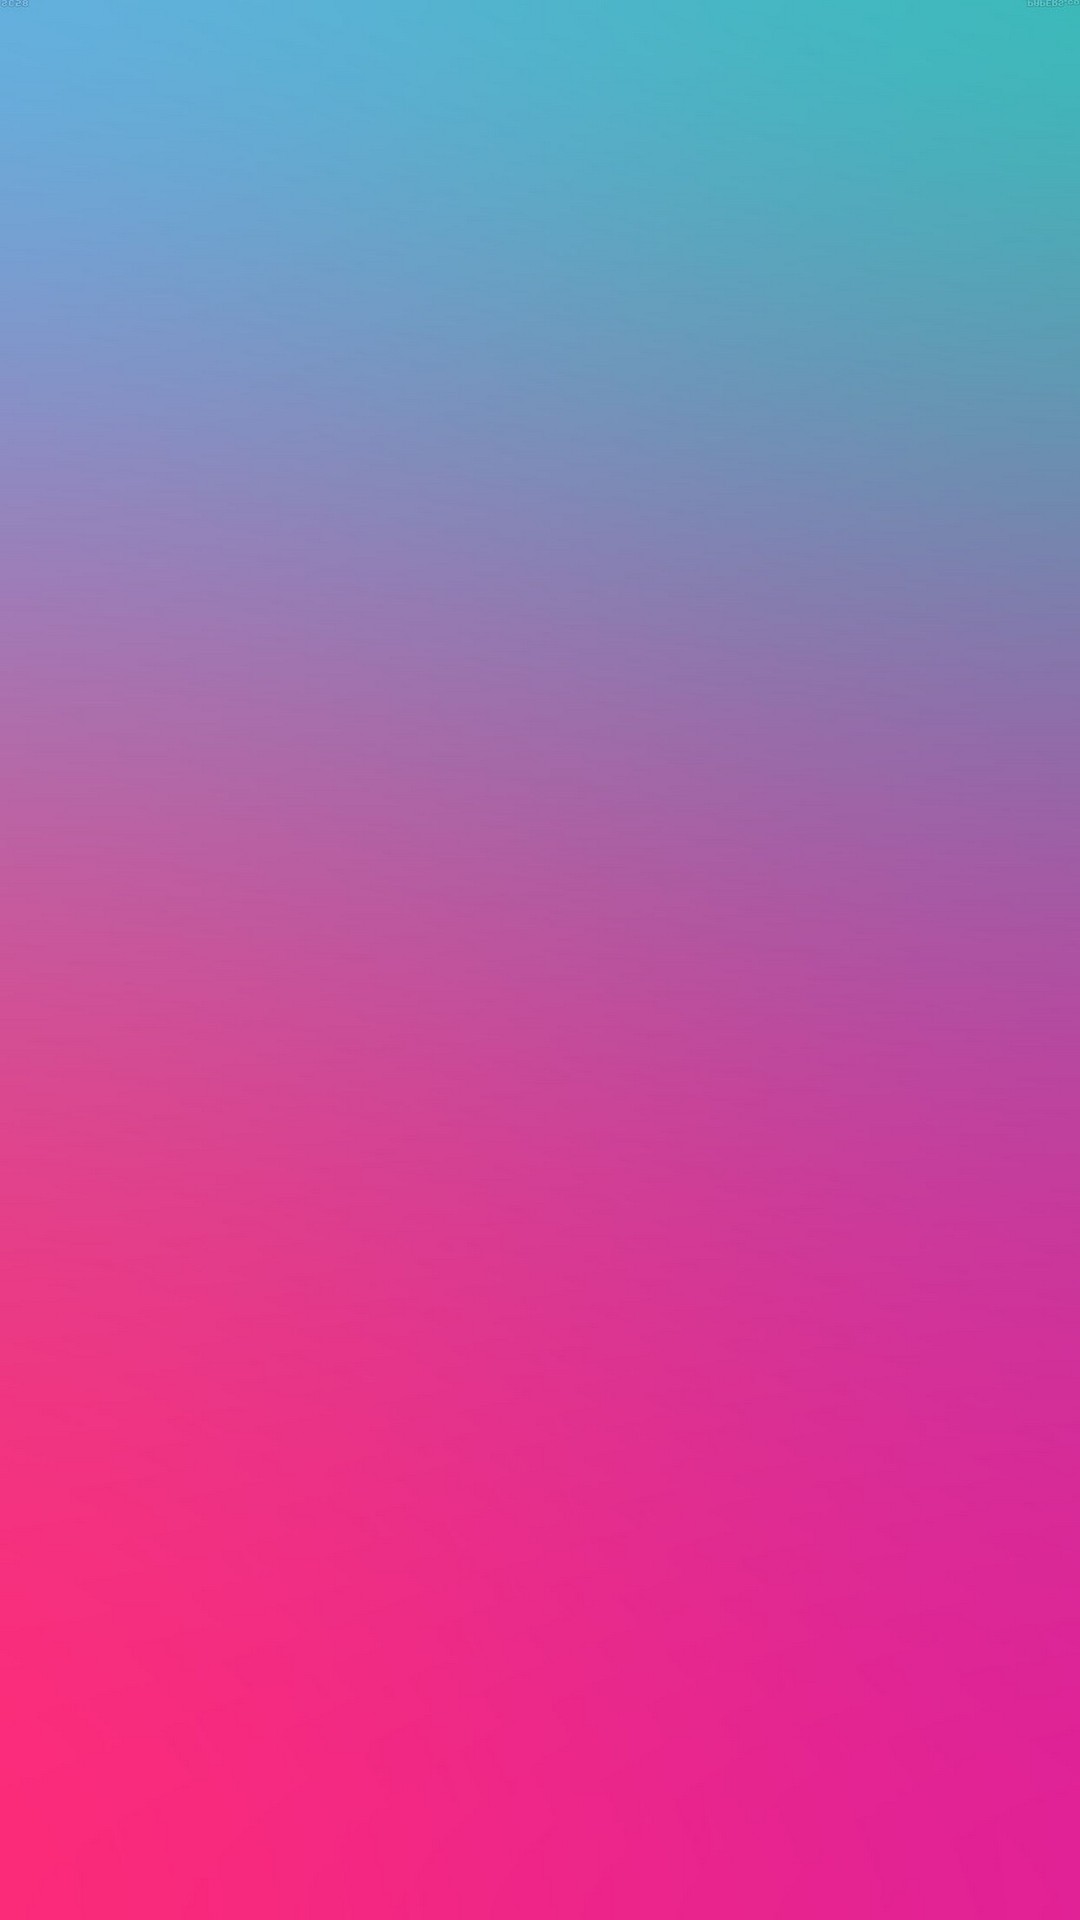 Gradient iPhone Wallpaper HD with high-resolution 1080x1920 pixel. You can set as wallpaper for Apple iPhone X, XS Max, XR, 8, 7, 6, SE, iPad. Enjoy and share your favorite HD wallpapers and background images